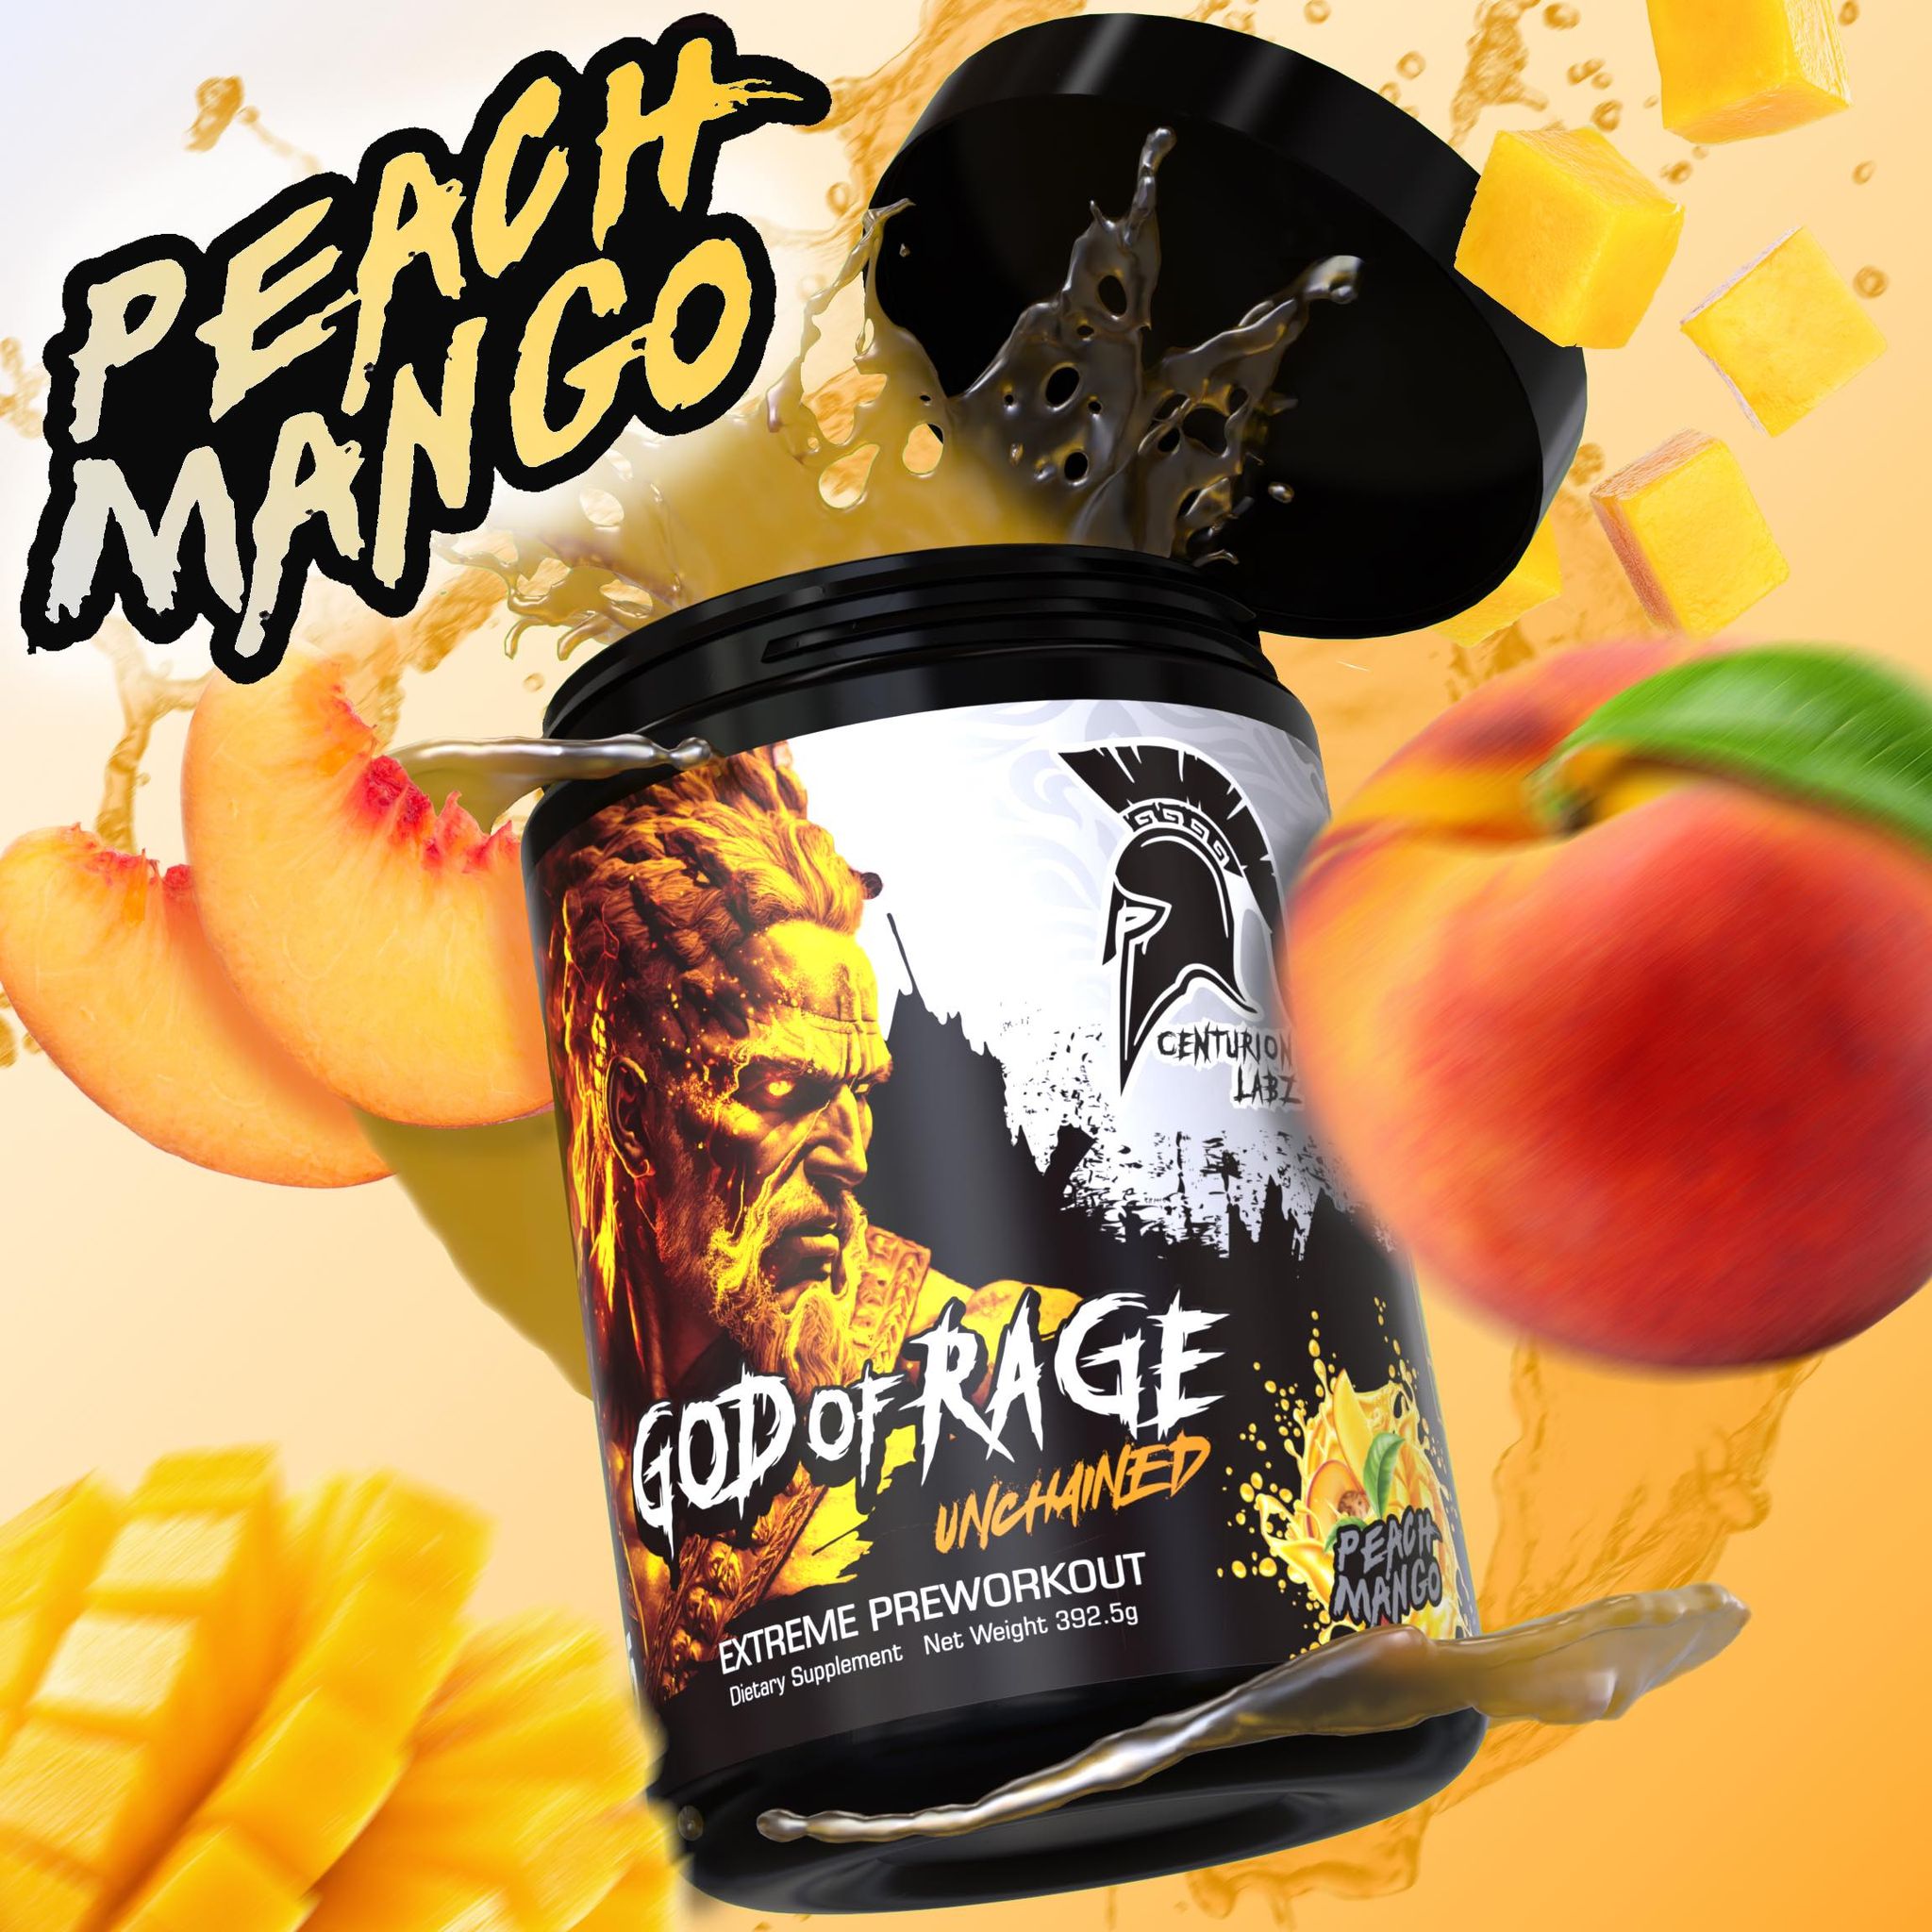 GOD OF RAGE® UNCHAINED! Extreme Preworkout*